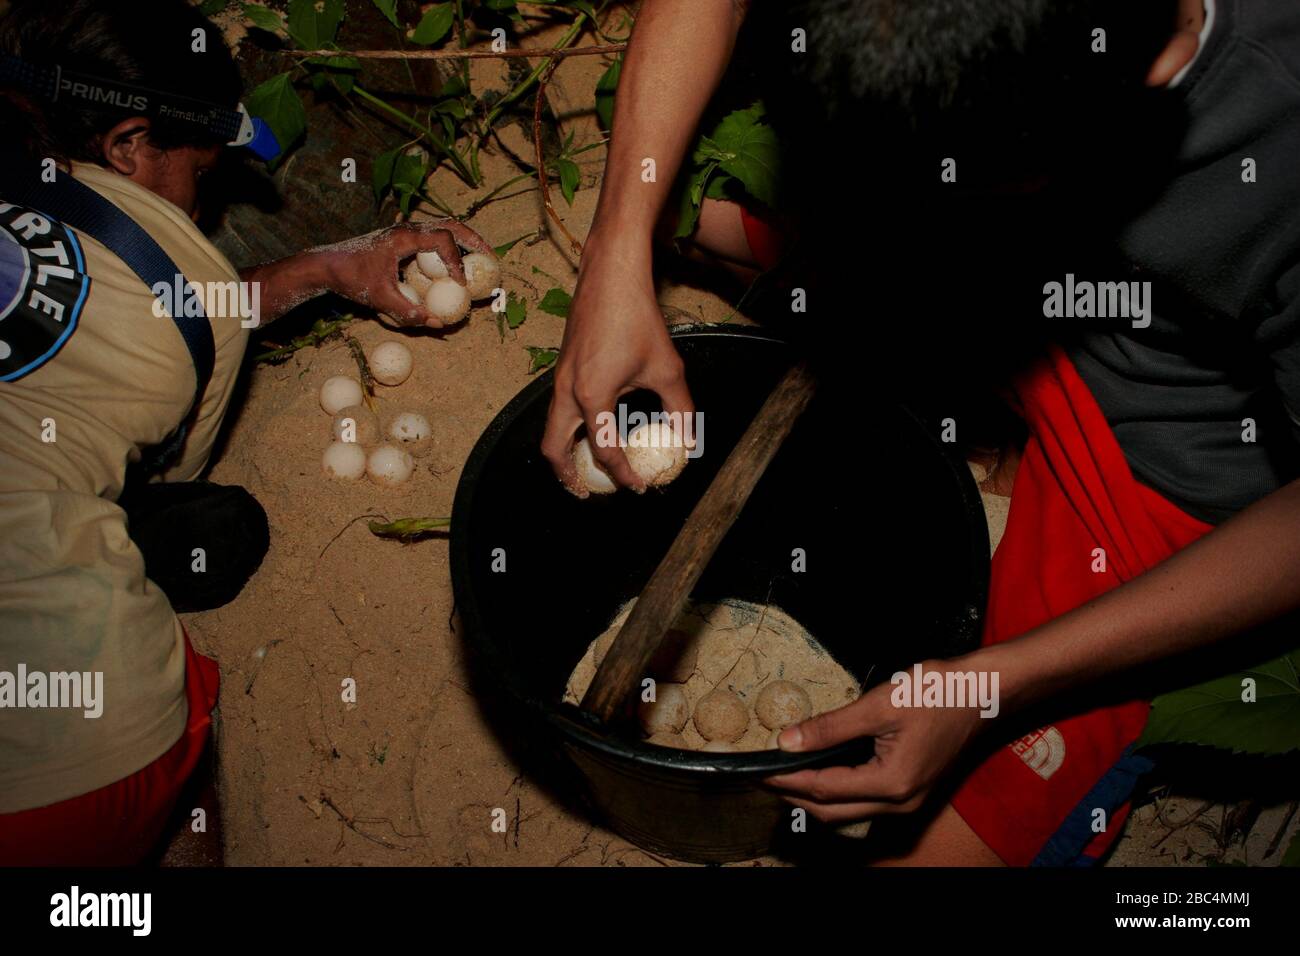 Voluntary conservation workers collecting the eggs of a green sea turtle (Chelonia mydas) at night before moving them to a hatchery facility. Stock Photo